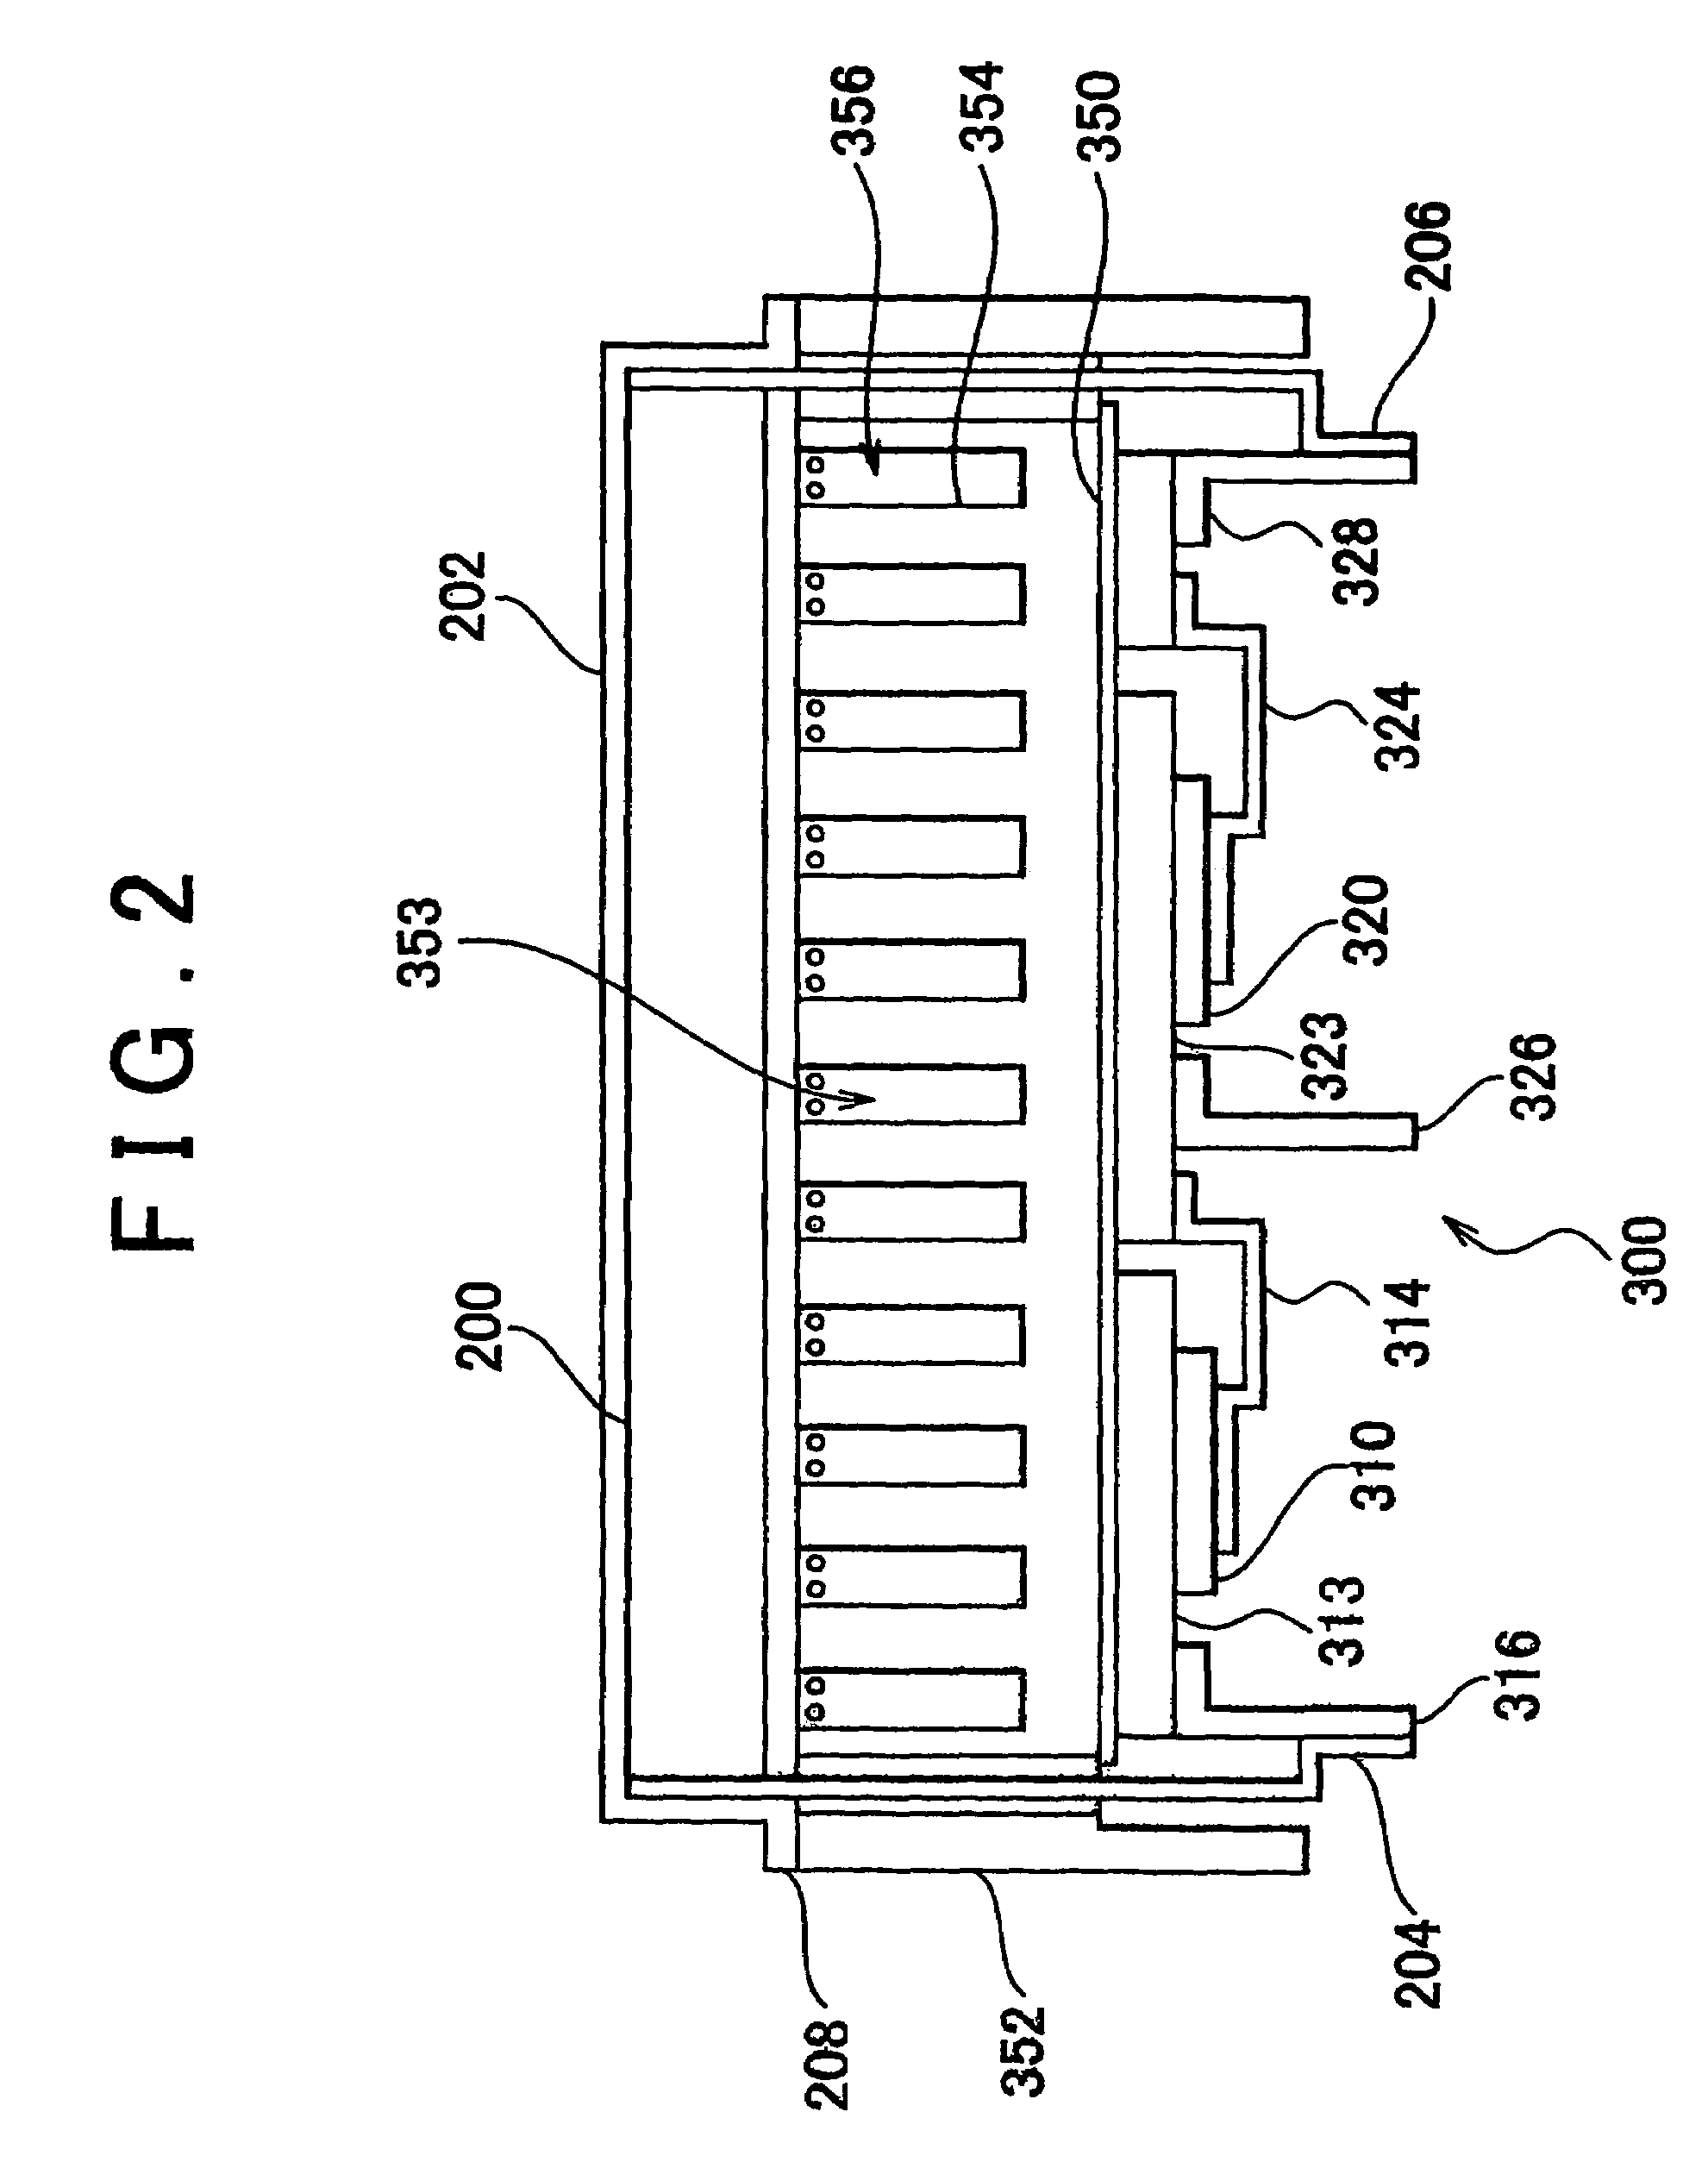 Cooling structure of electric device